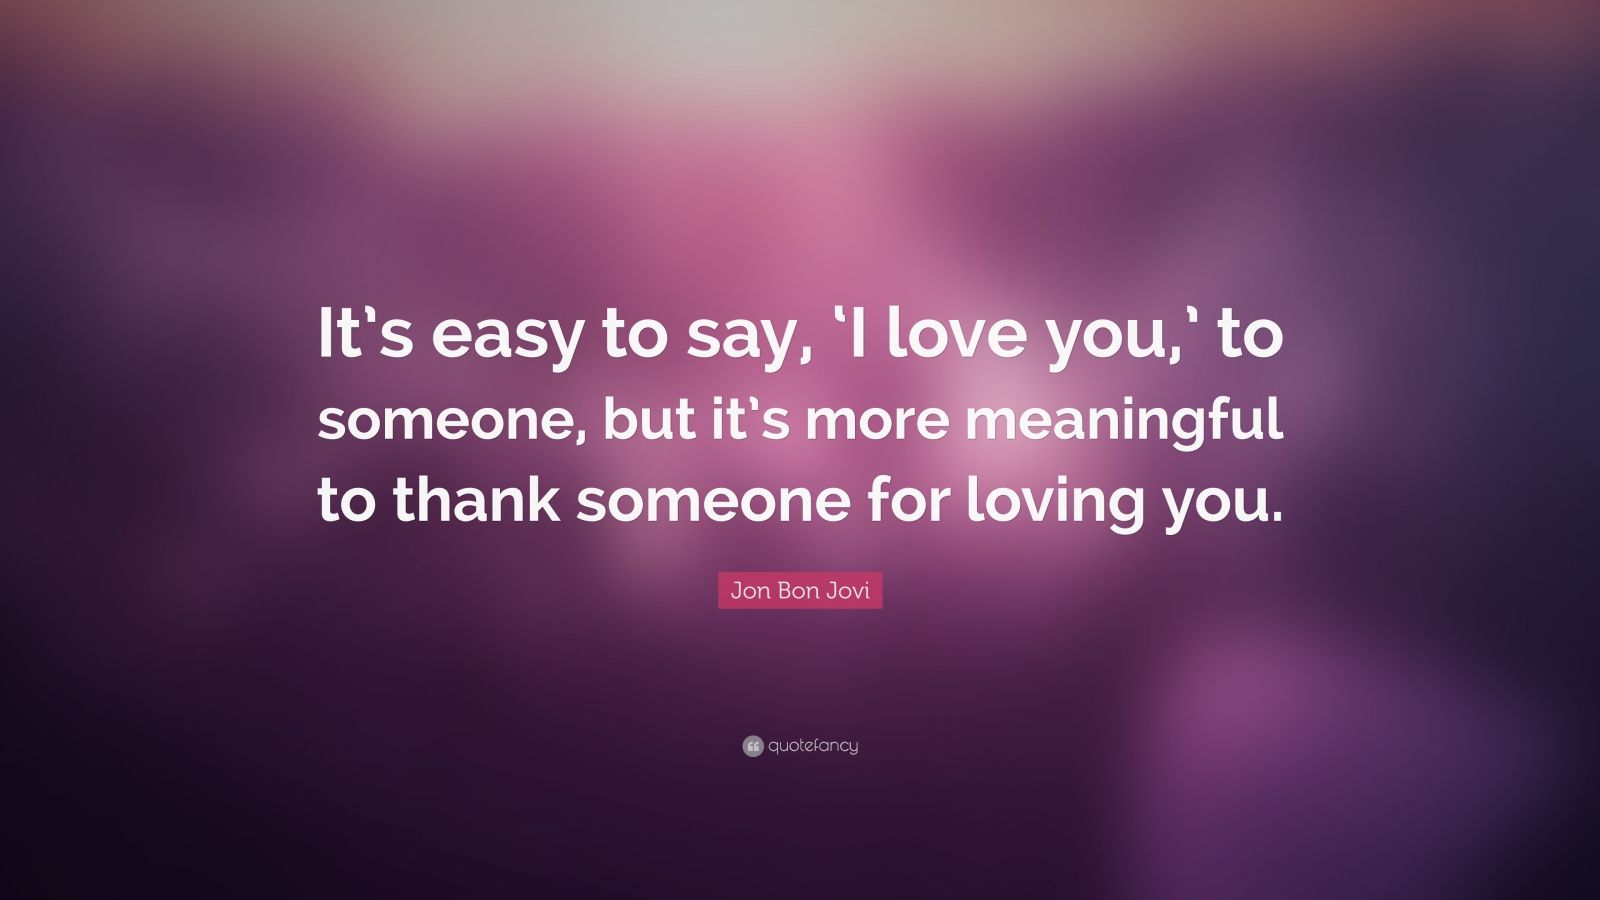 Jon Bon Jovi Quote: “It’s easy to say, ‘I love you,’ to someone, but it